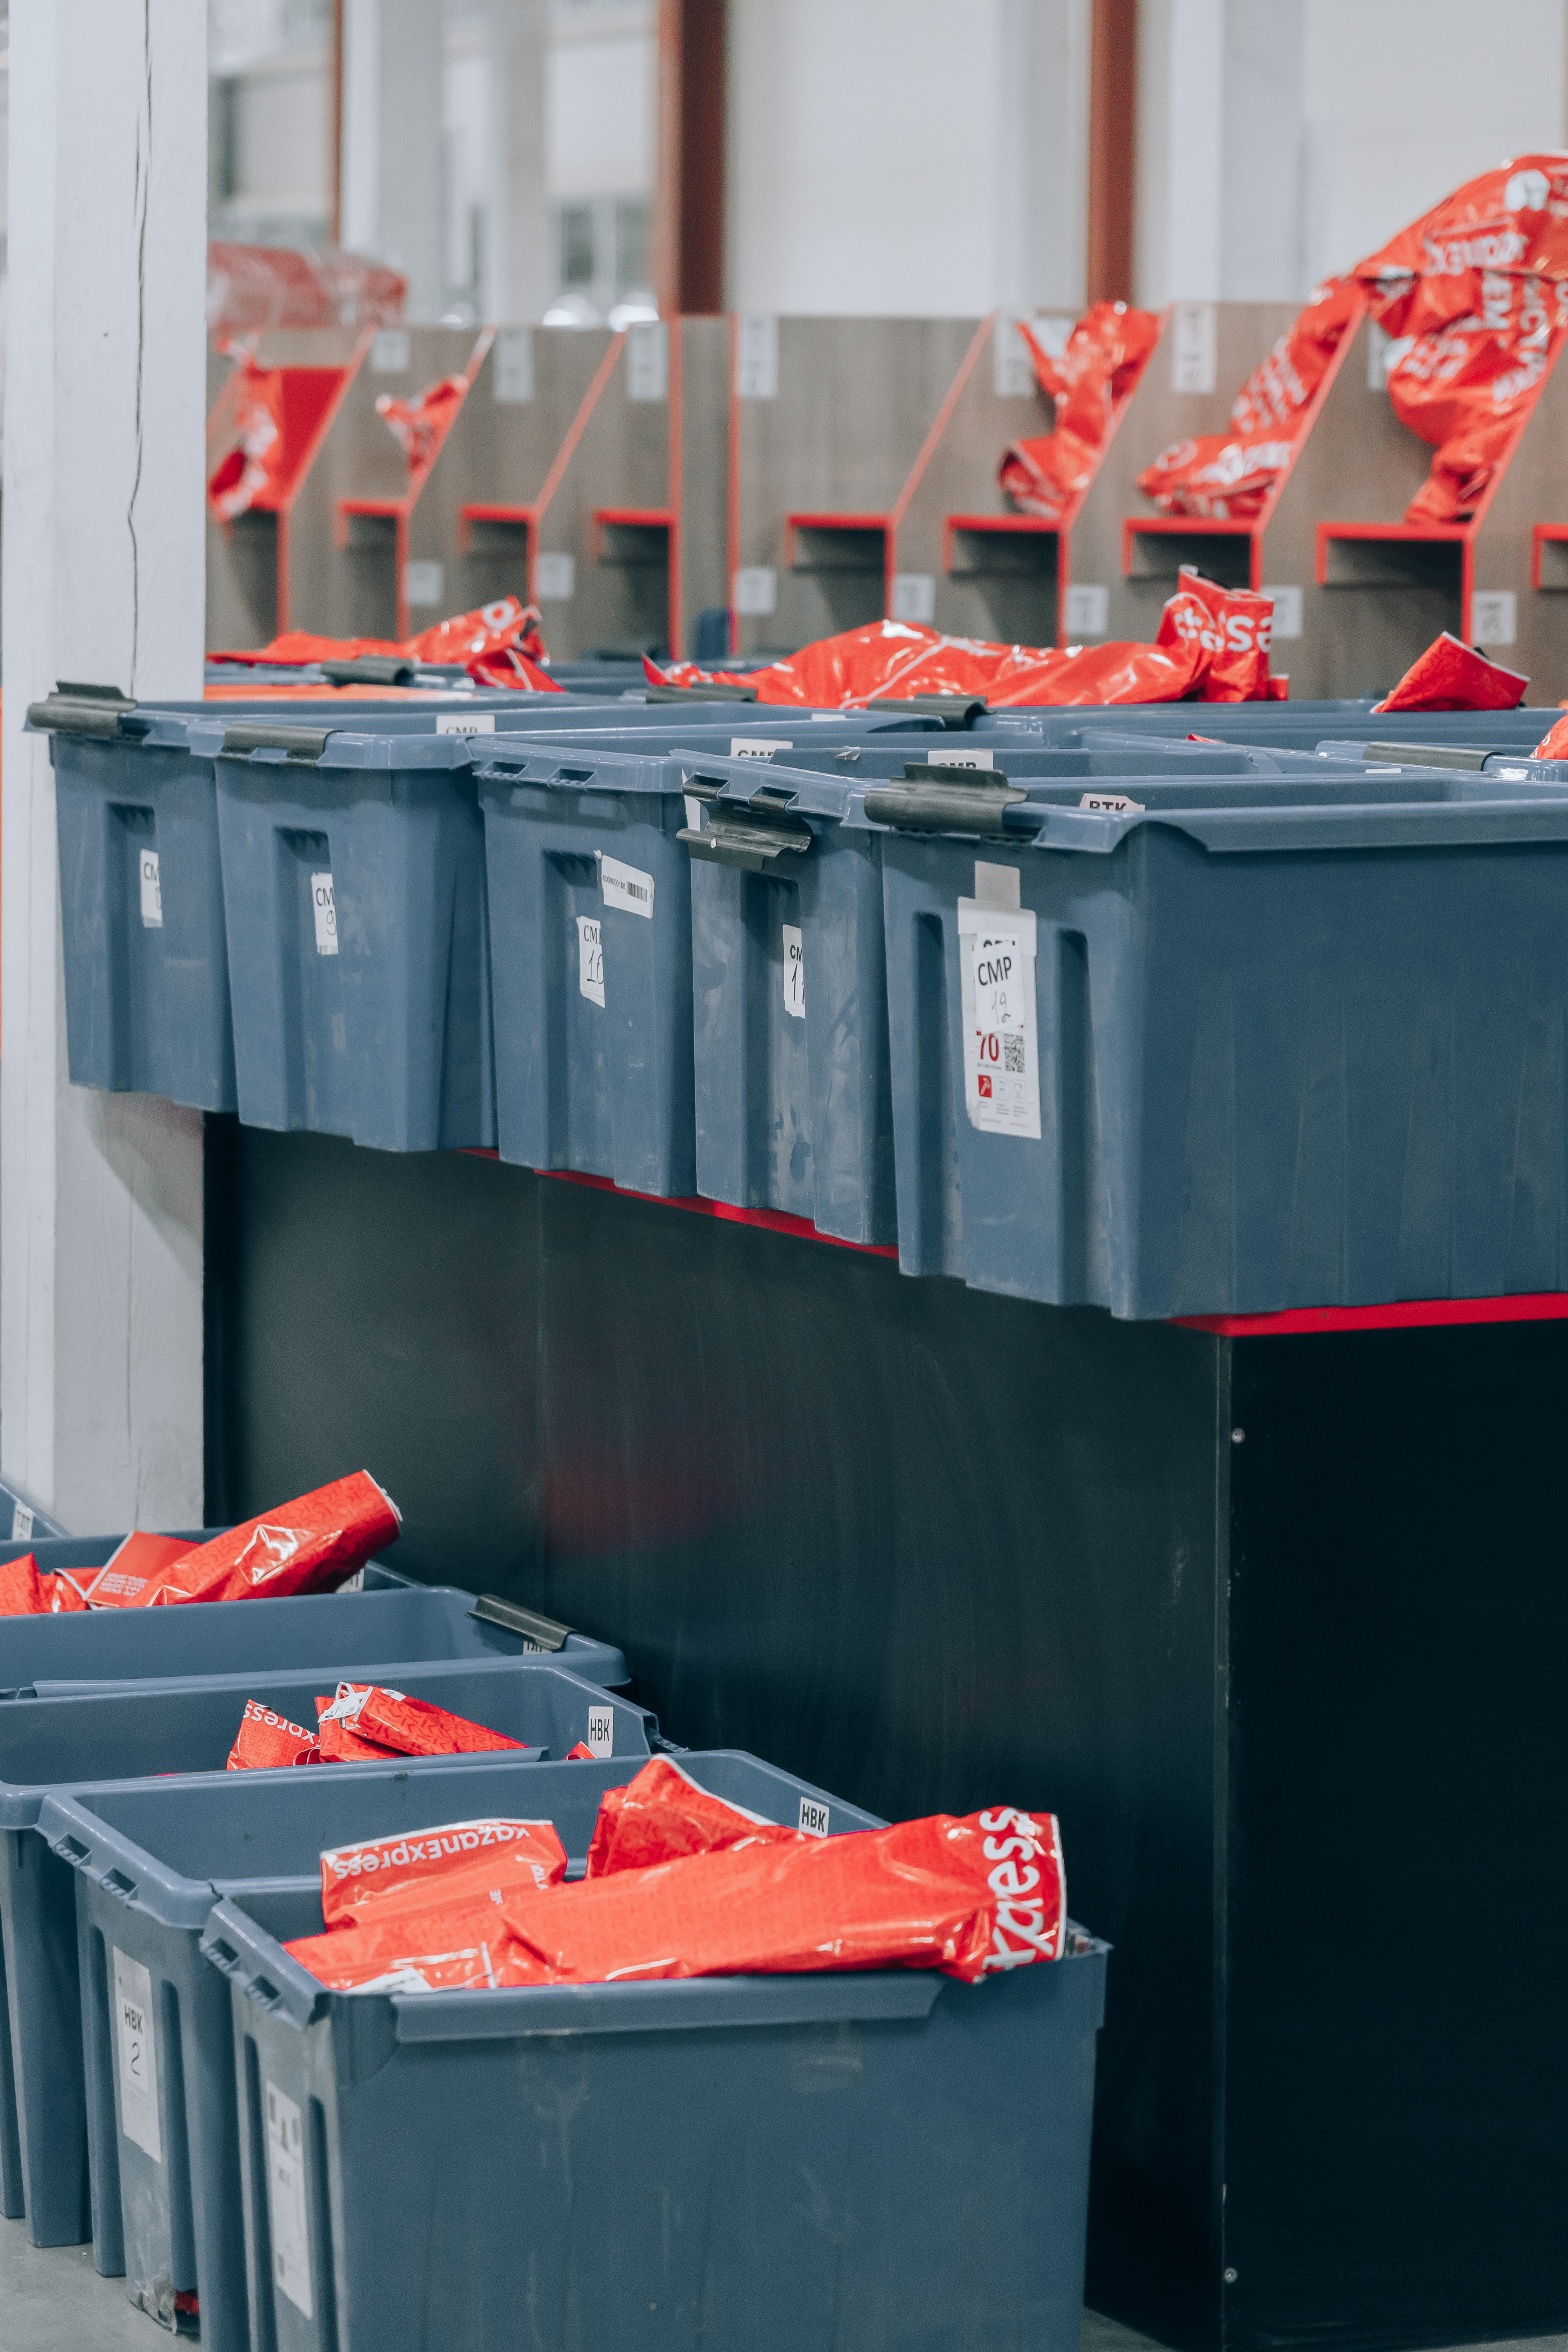 SkuNexus suggests eliminating waste in eCommerce order fulfillment by standardizing parcels, appropriately dictating packing materials, matching shipping service to customer expectations, and tracking packages. 